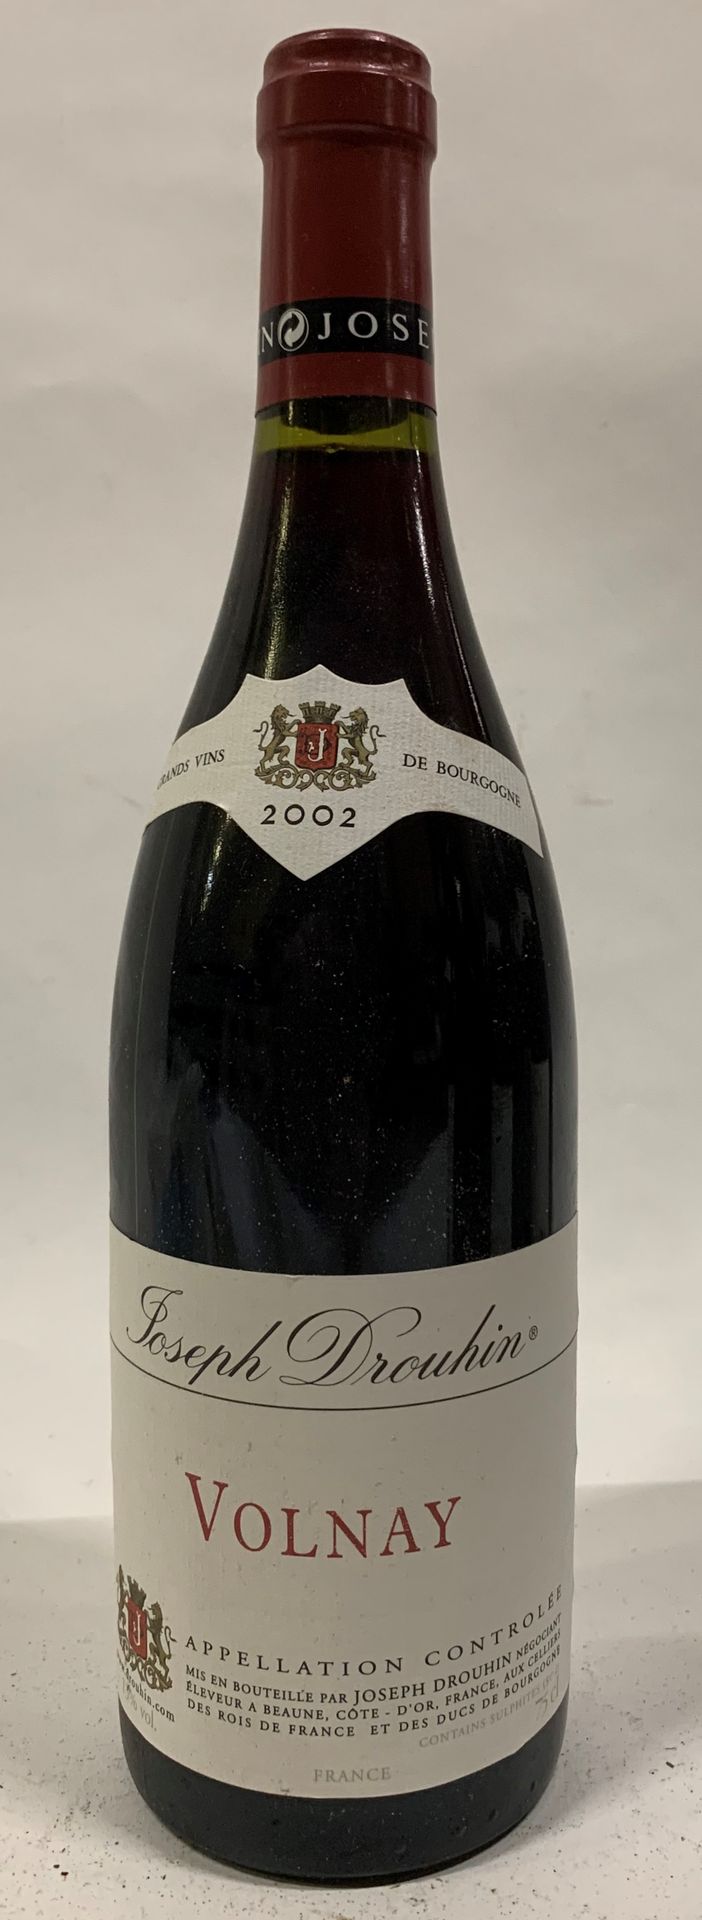 Null ● VOLNAY | Joseph Drouhin, 2002

12 bouteilles

Réf. 8